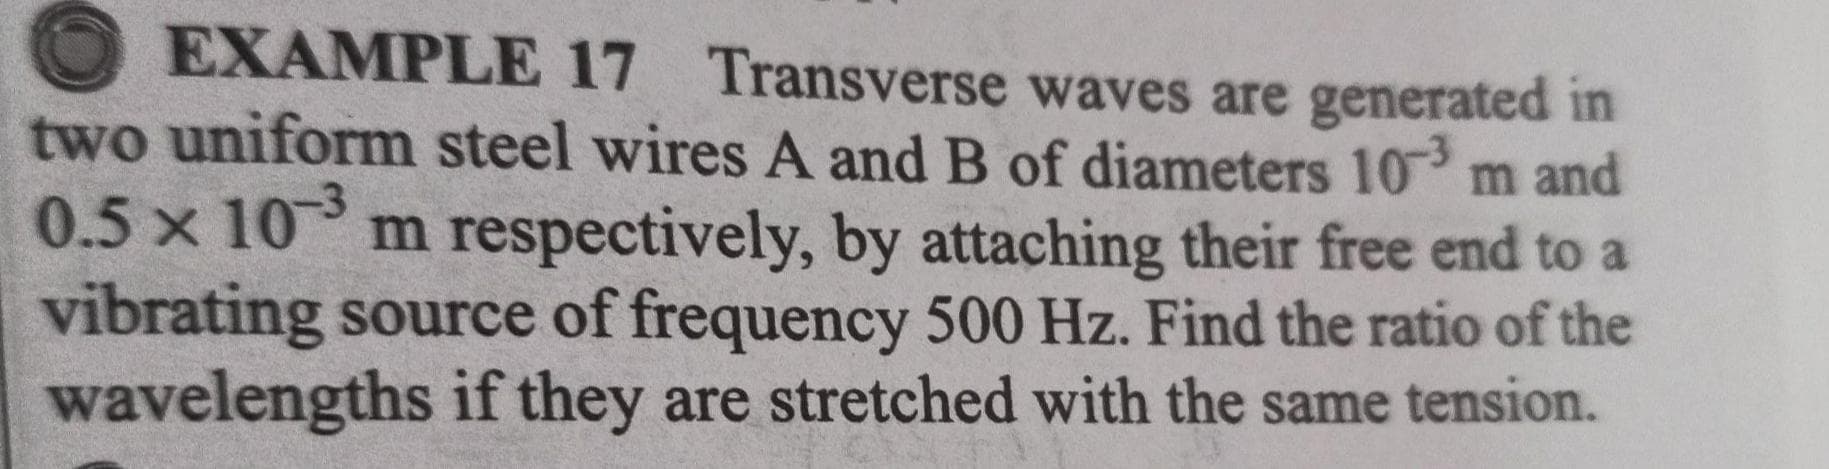 EXAMPLE 17 Transverse waves are generated in
two uniform steel wires A and B of diameters 10 m and
0.5 x 10 m respectively, by attaching their free end to a
vibrating source of frequency 500 Hz. Find the ratio of the
wavelengths if they are stretched with the same tension.
-3
